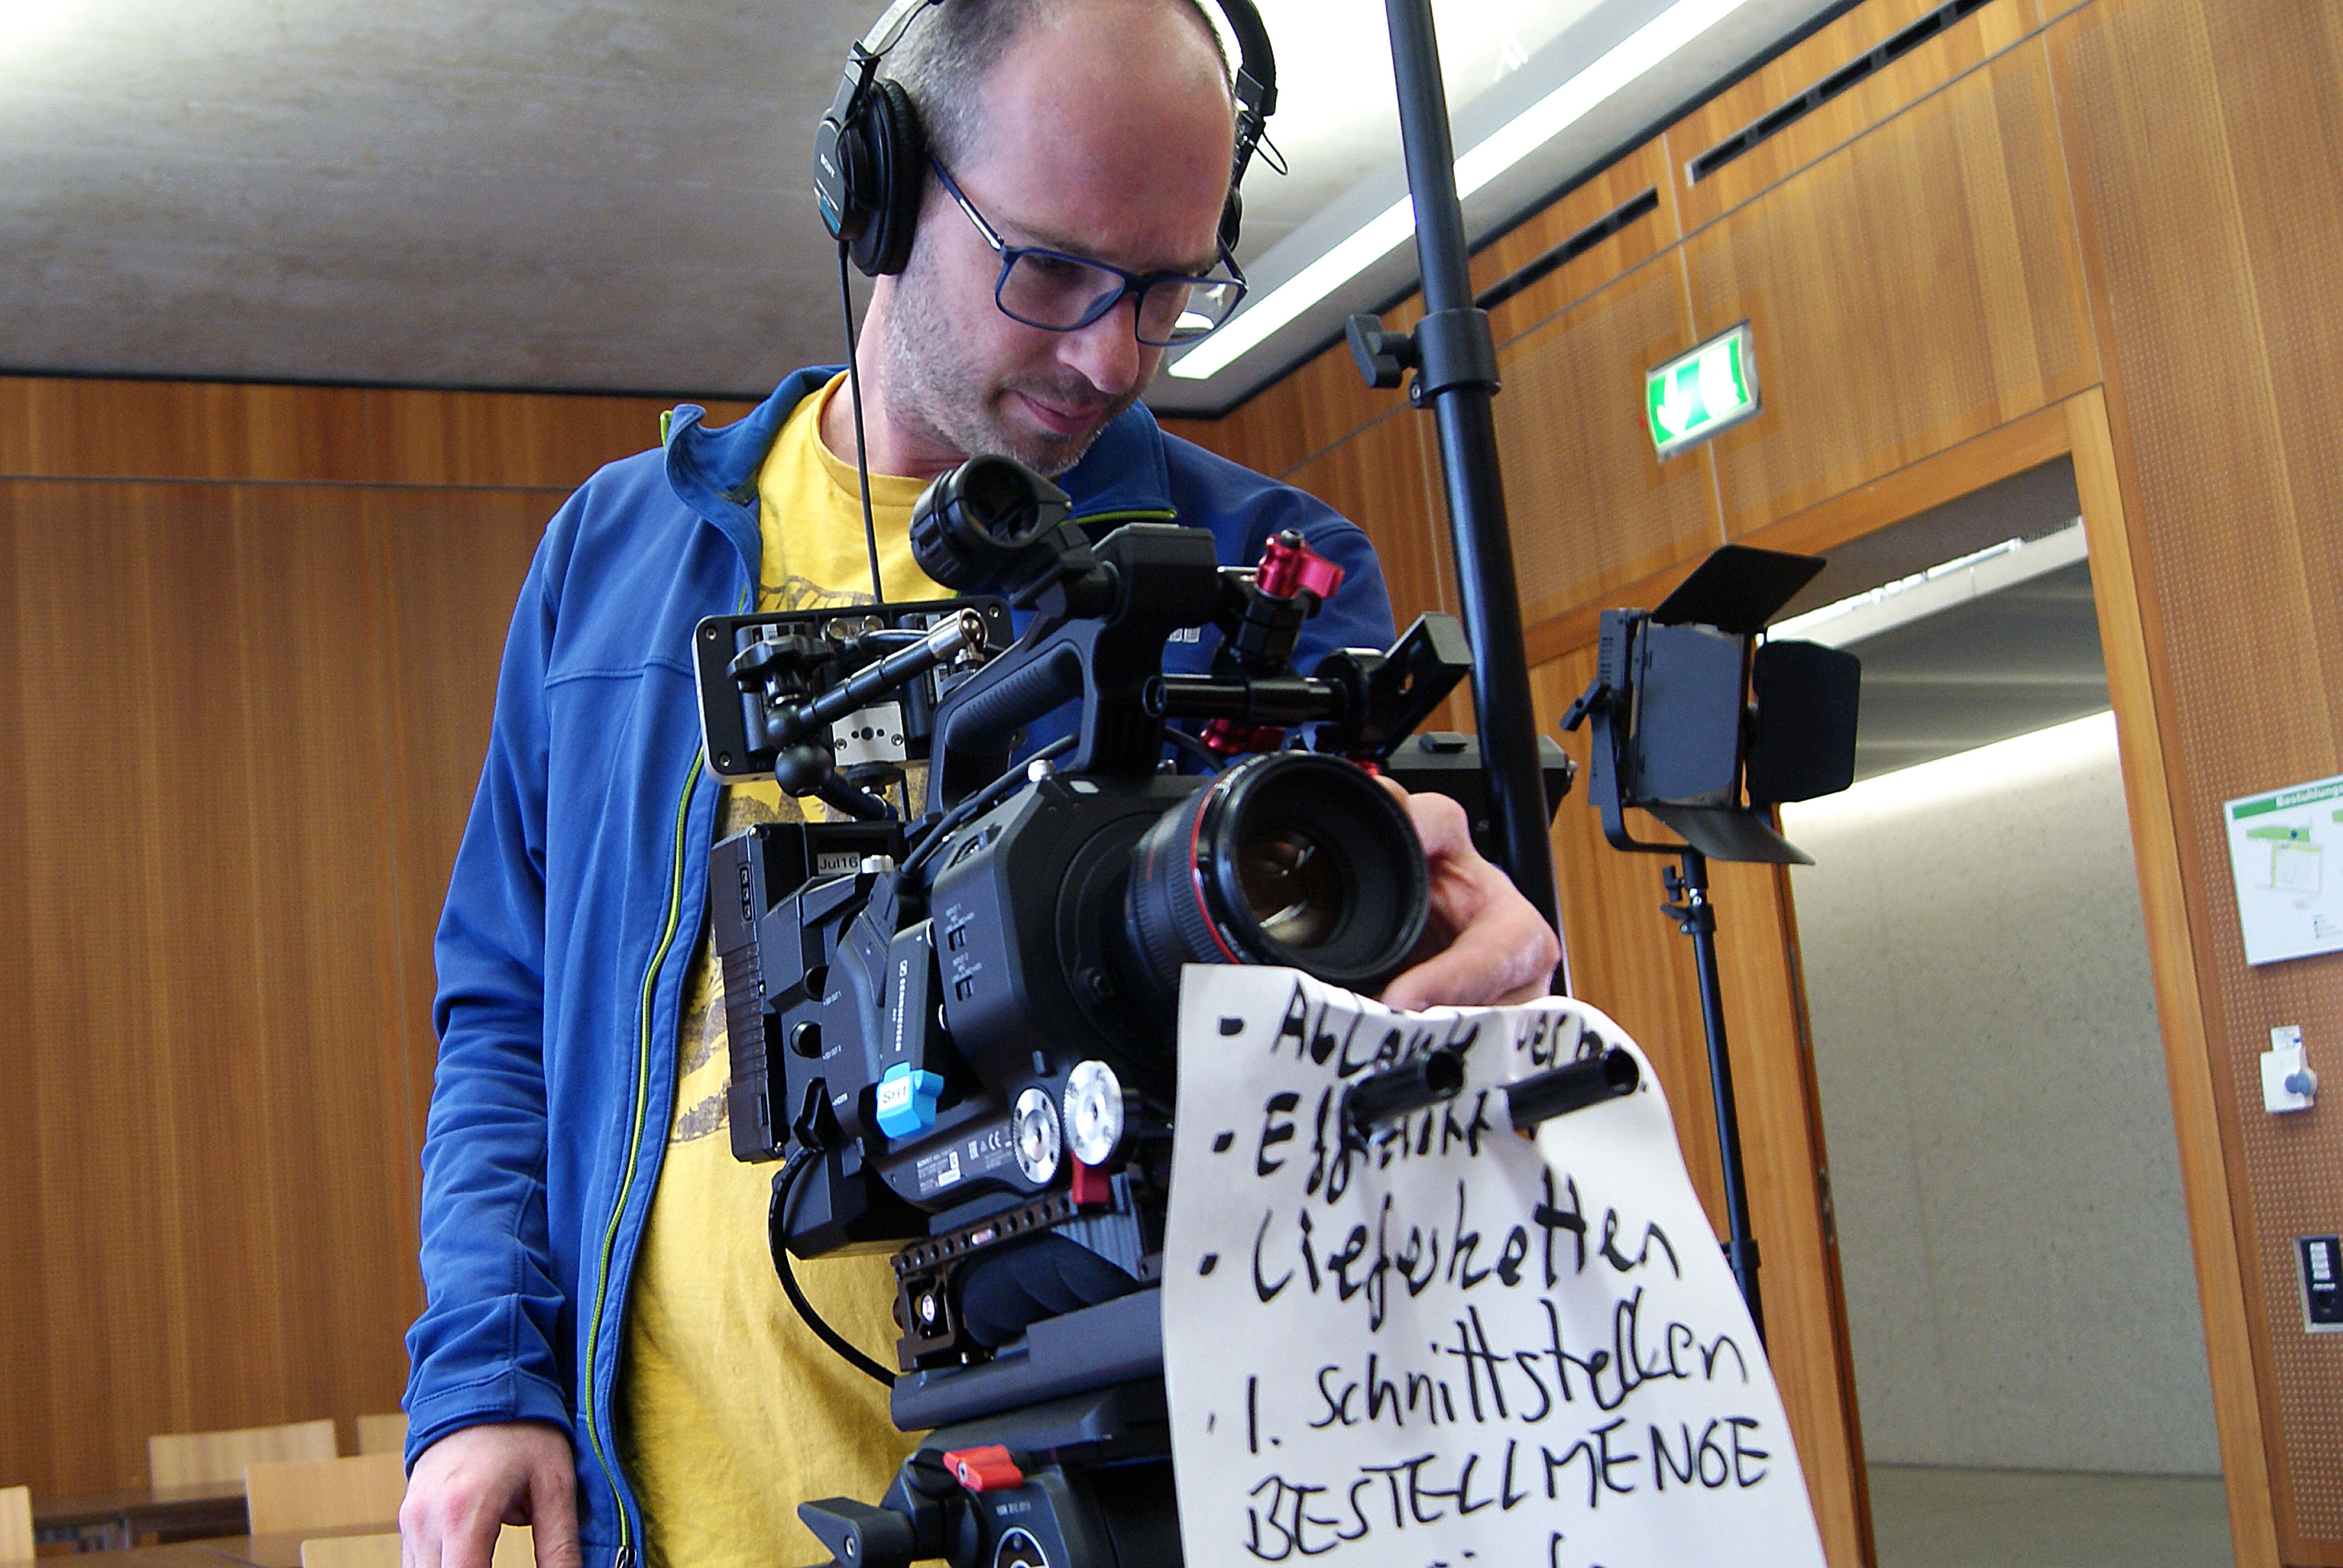 A cameraman in action: filming an online lecture